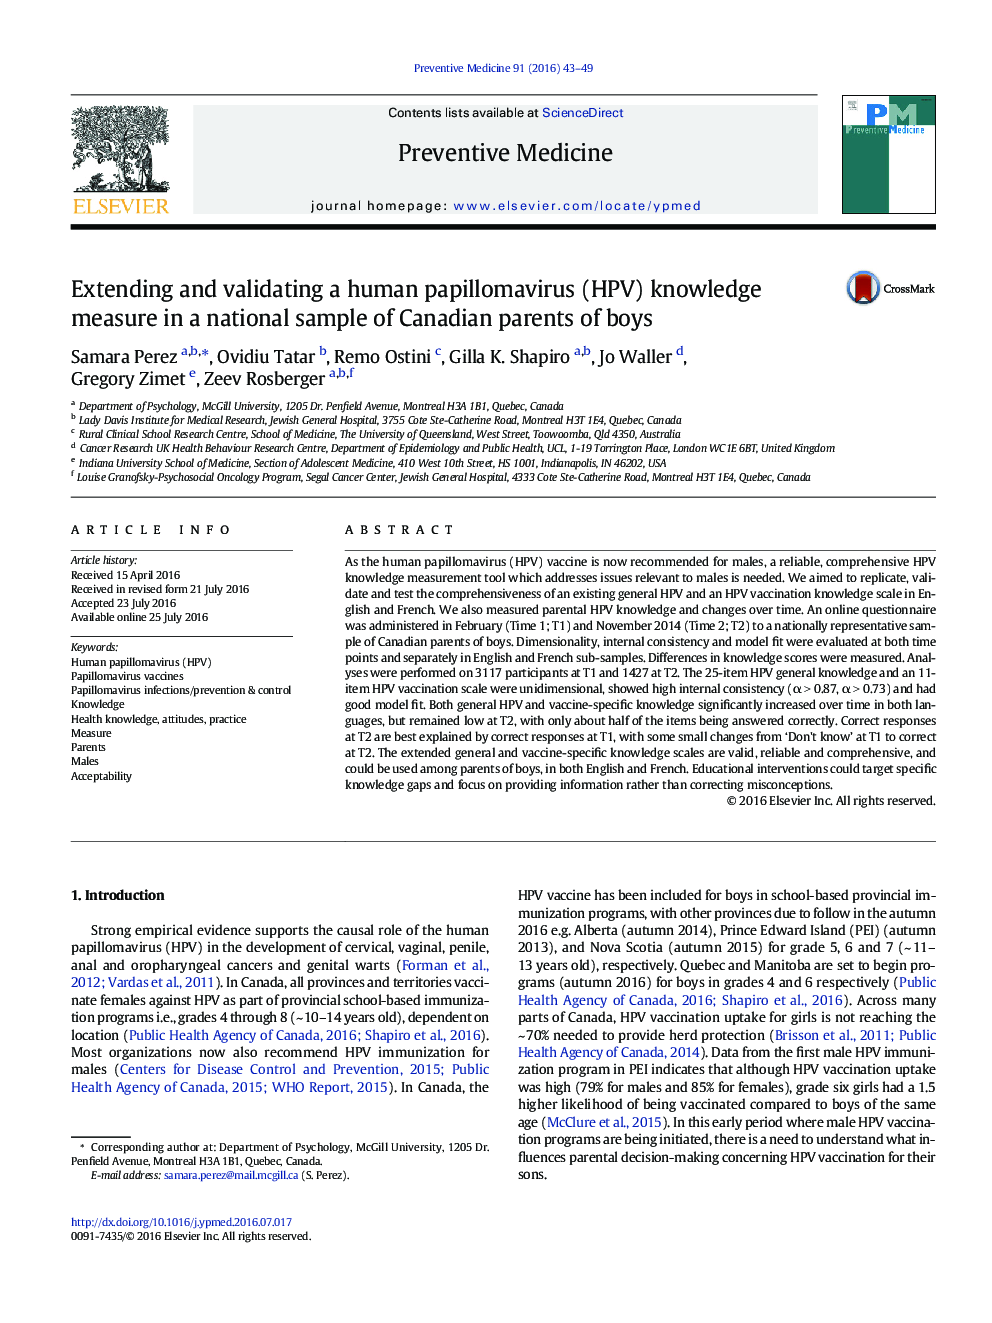 Extending and validating a human papillomavirus (HPV) knowledge measure in a national sample of Canadian parents of boys